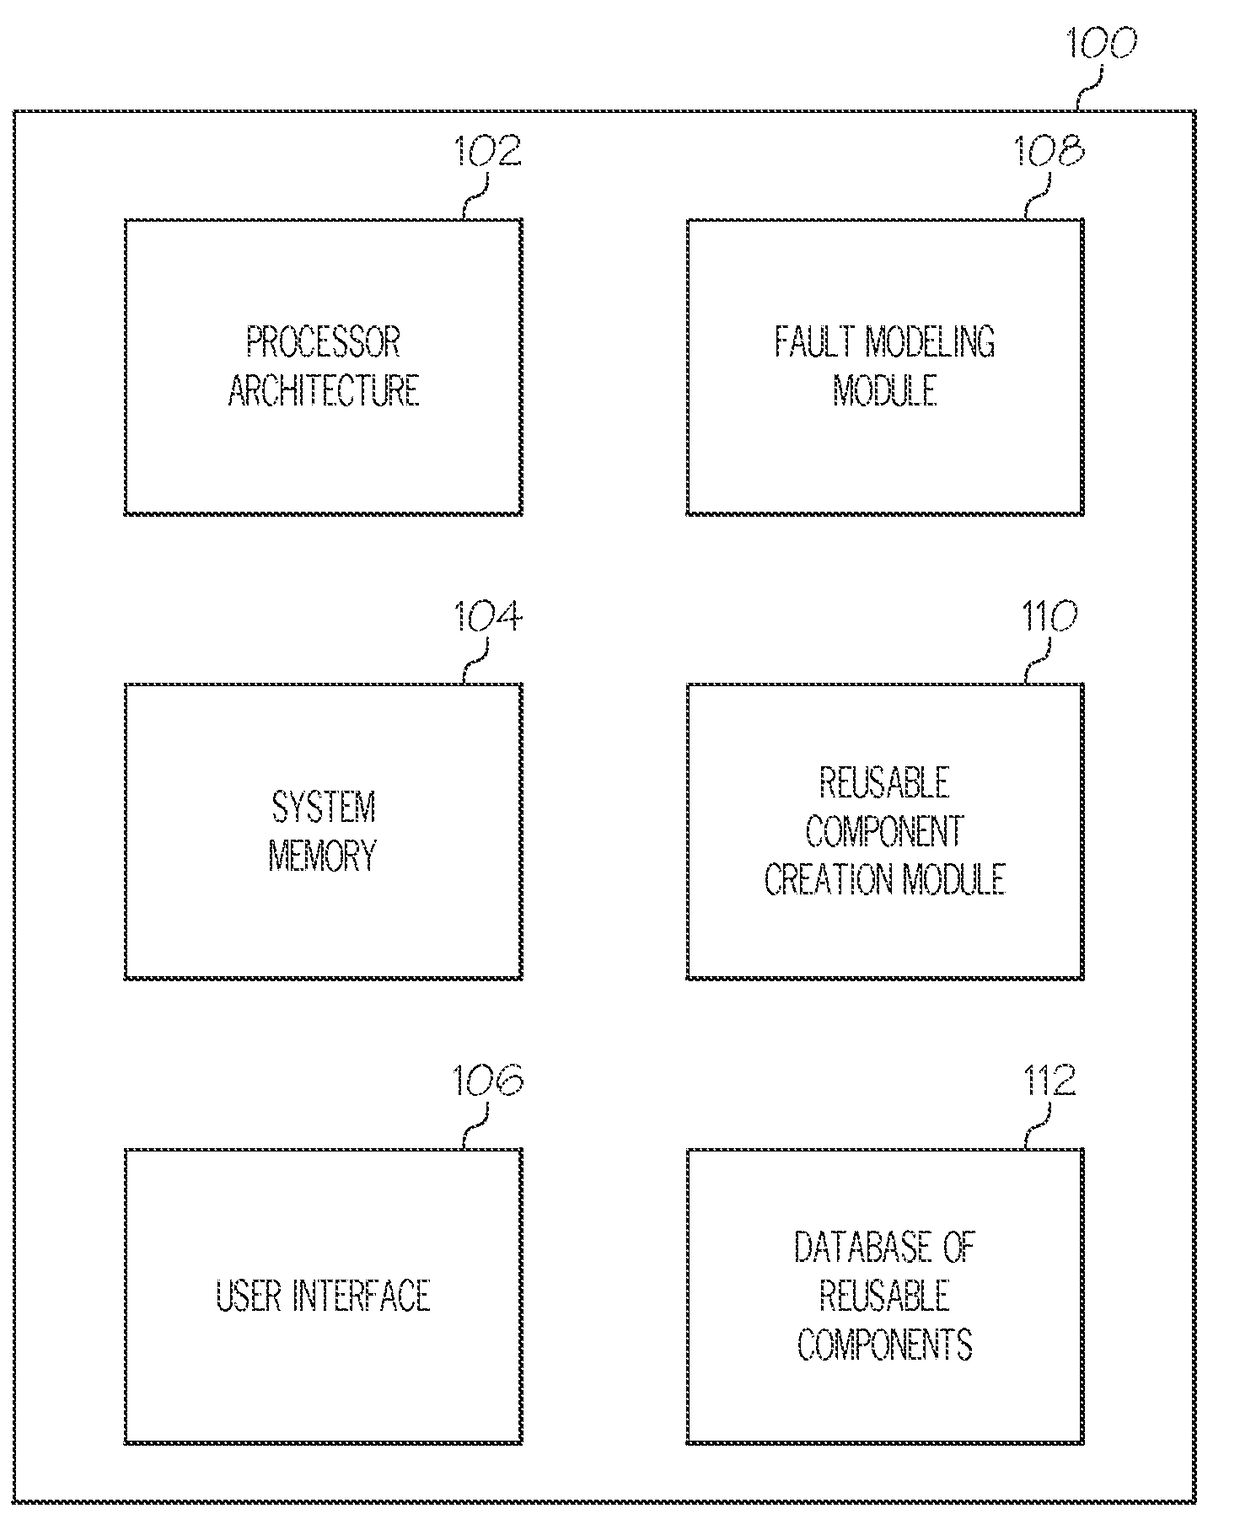 Methods and apparatus for the creation and use of reusable fault model components in fault modeling and complex system prognostics